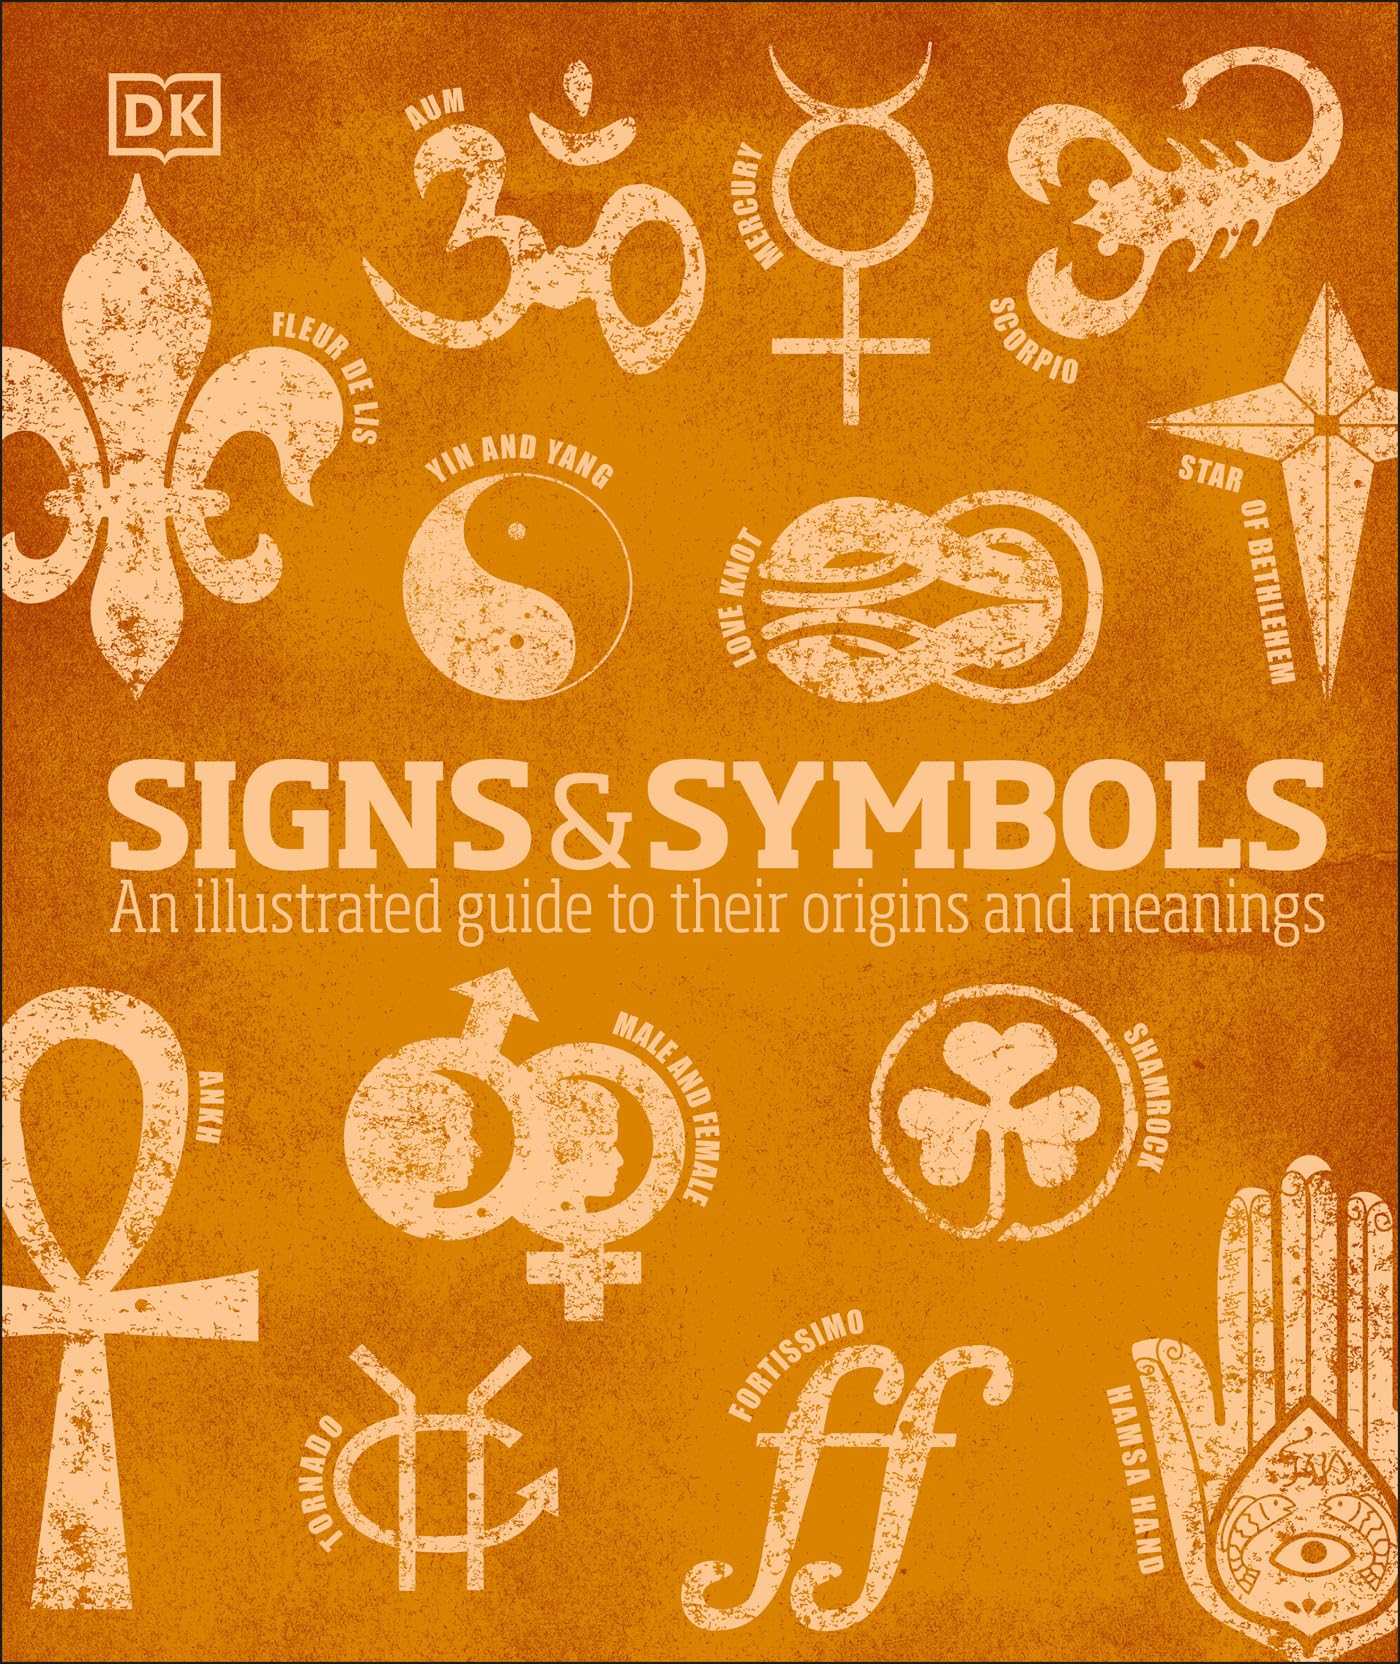 Signs and Symbols: An Illustrated Guide to Their Origins and Meanings (DK Compact Culture Guides) (eBook) by DK $1.99